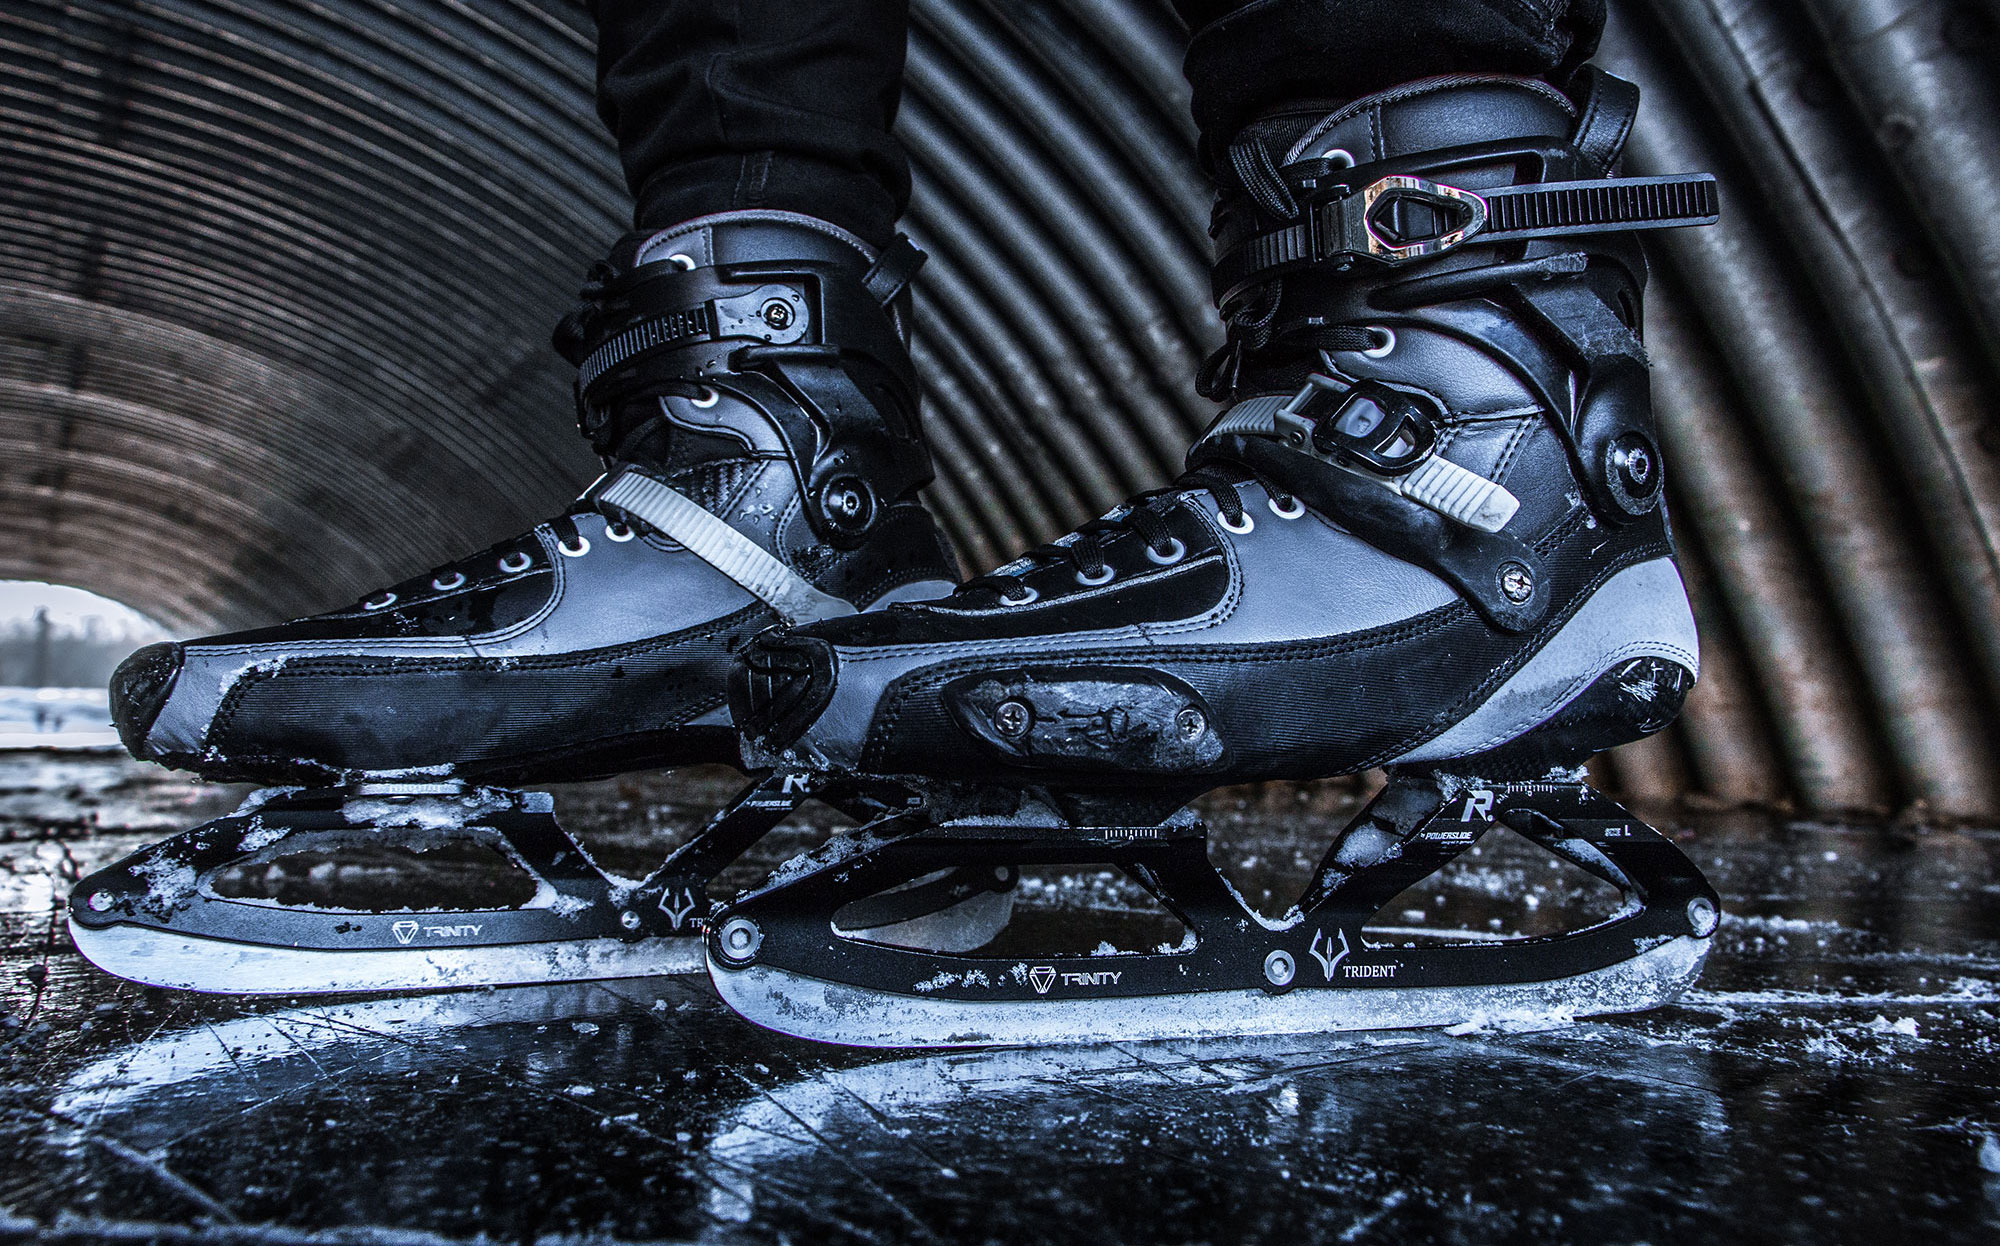 Ice Blade Frames and Conversion Kits for Inline Skates Buyers Guide